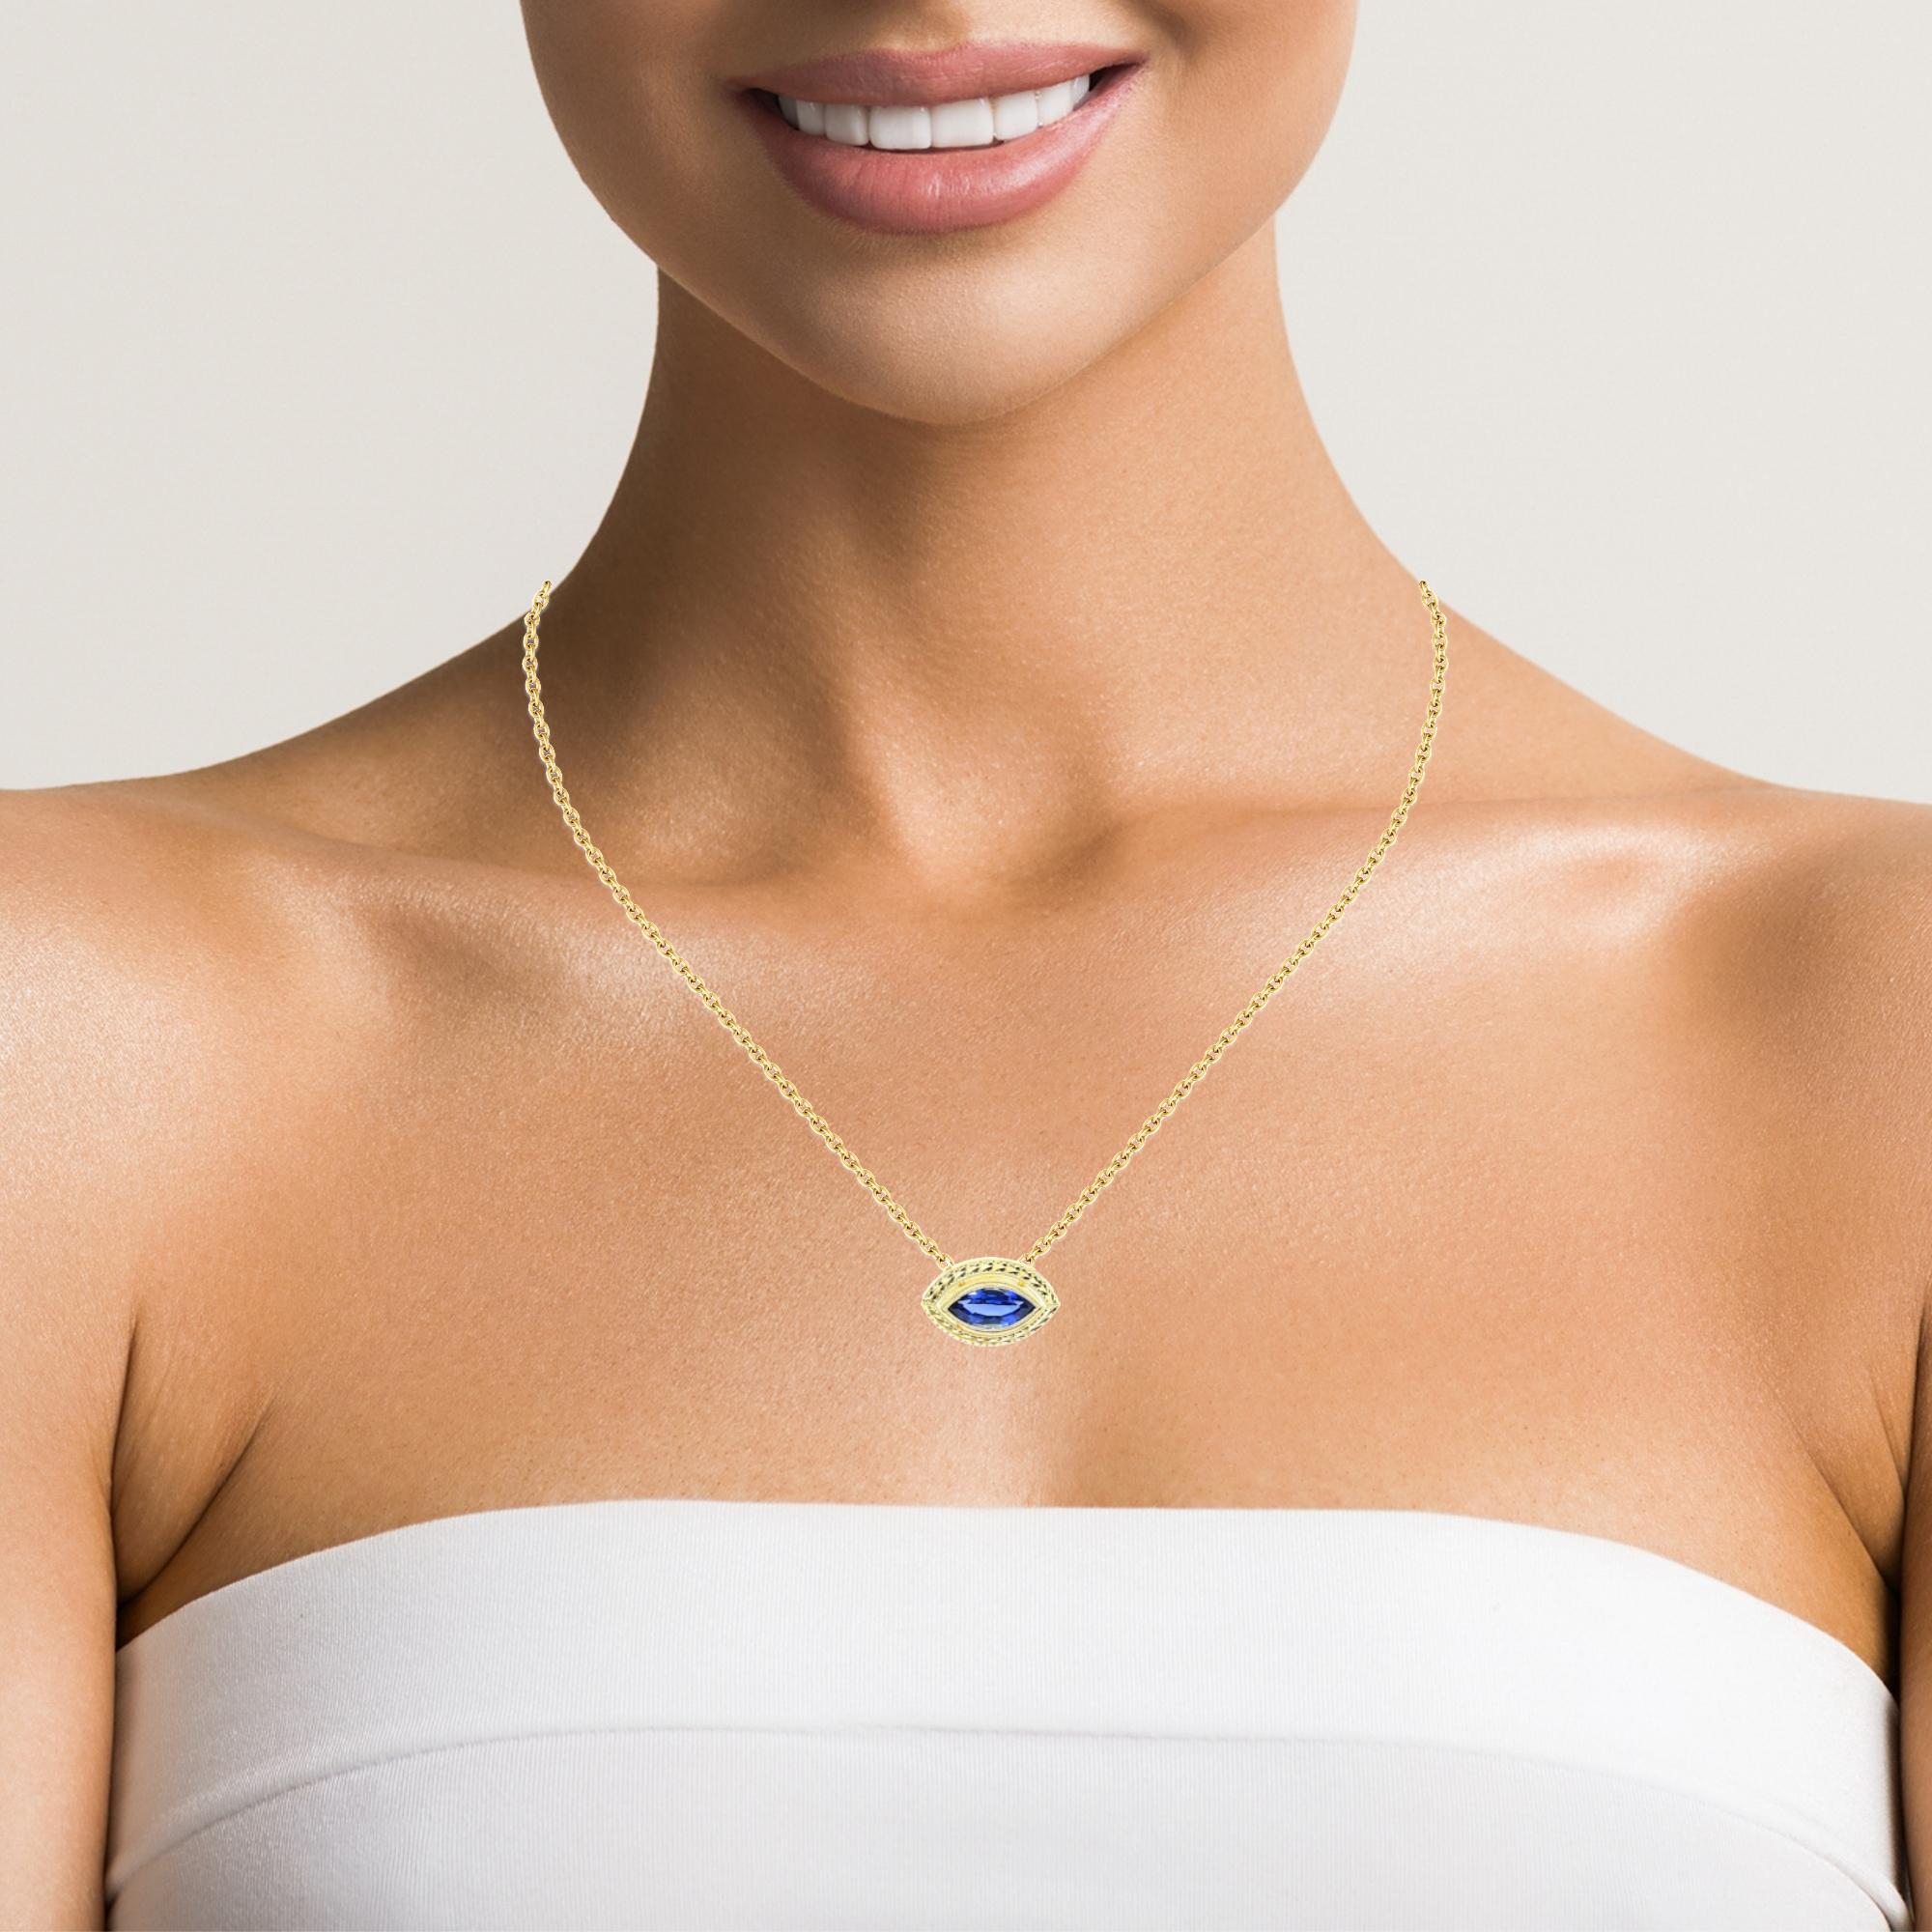 Marquise Cut Tanzanite Necklace in Yellow Gold, 2.34 Carats, Adjustable Length 4